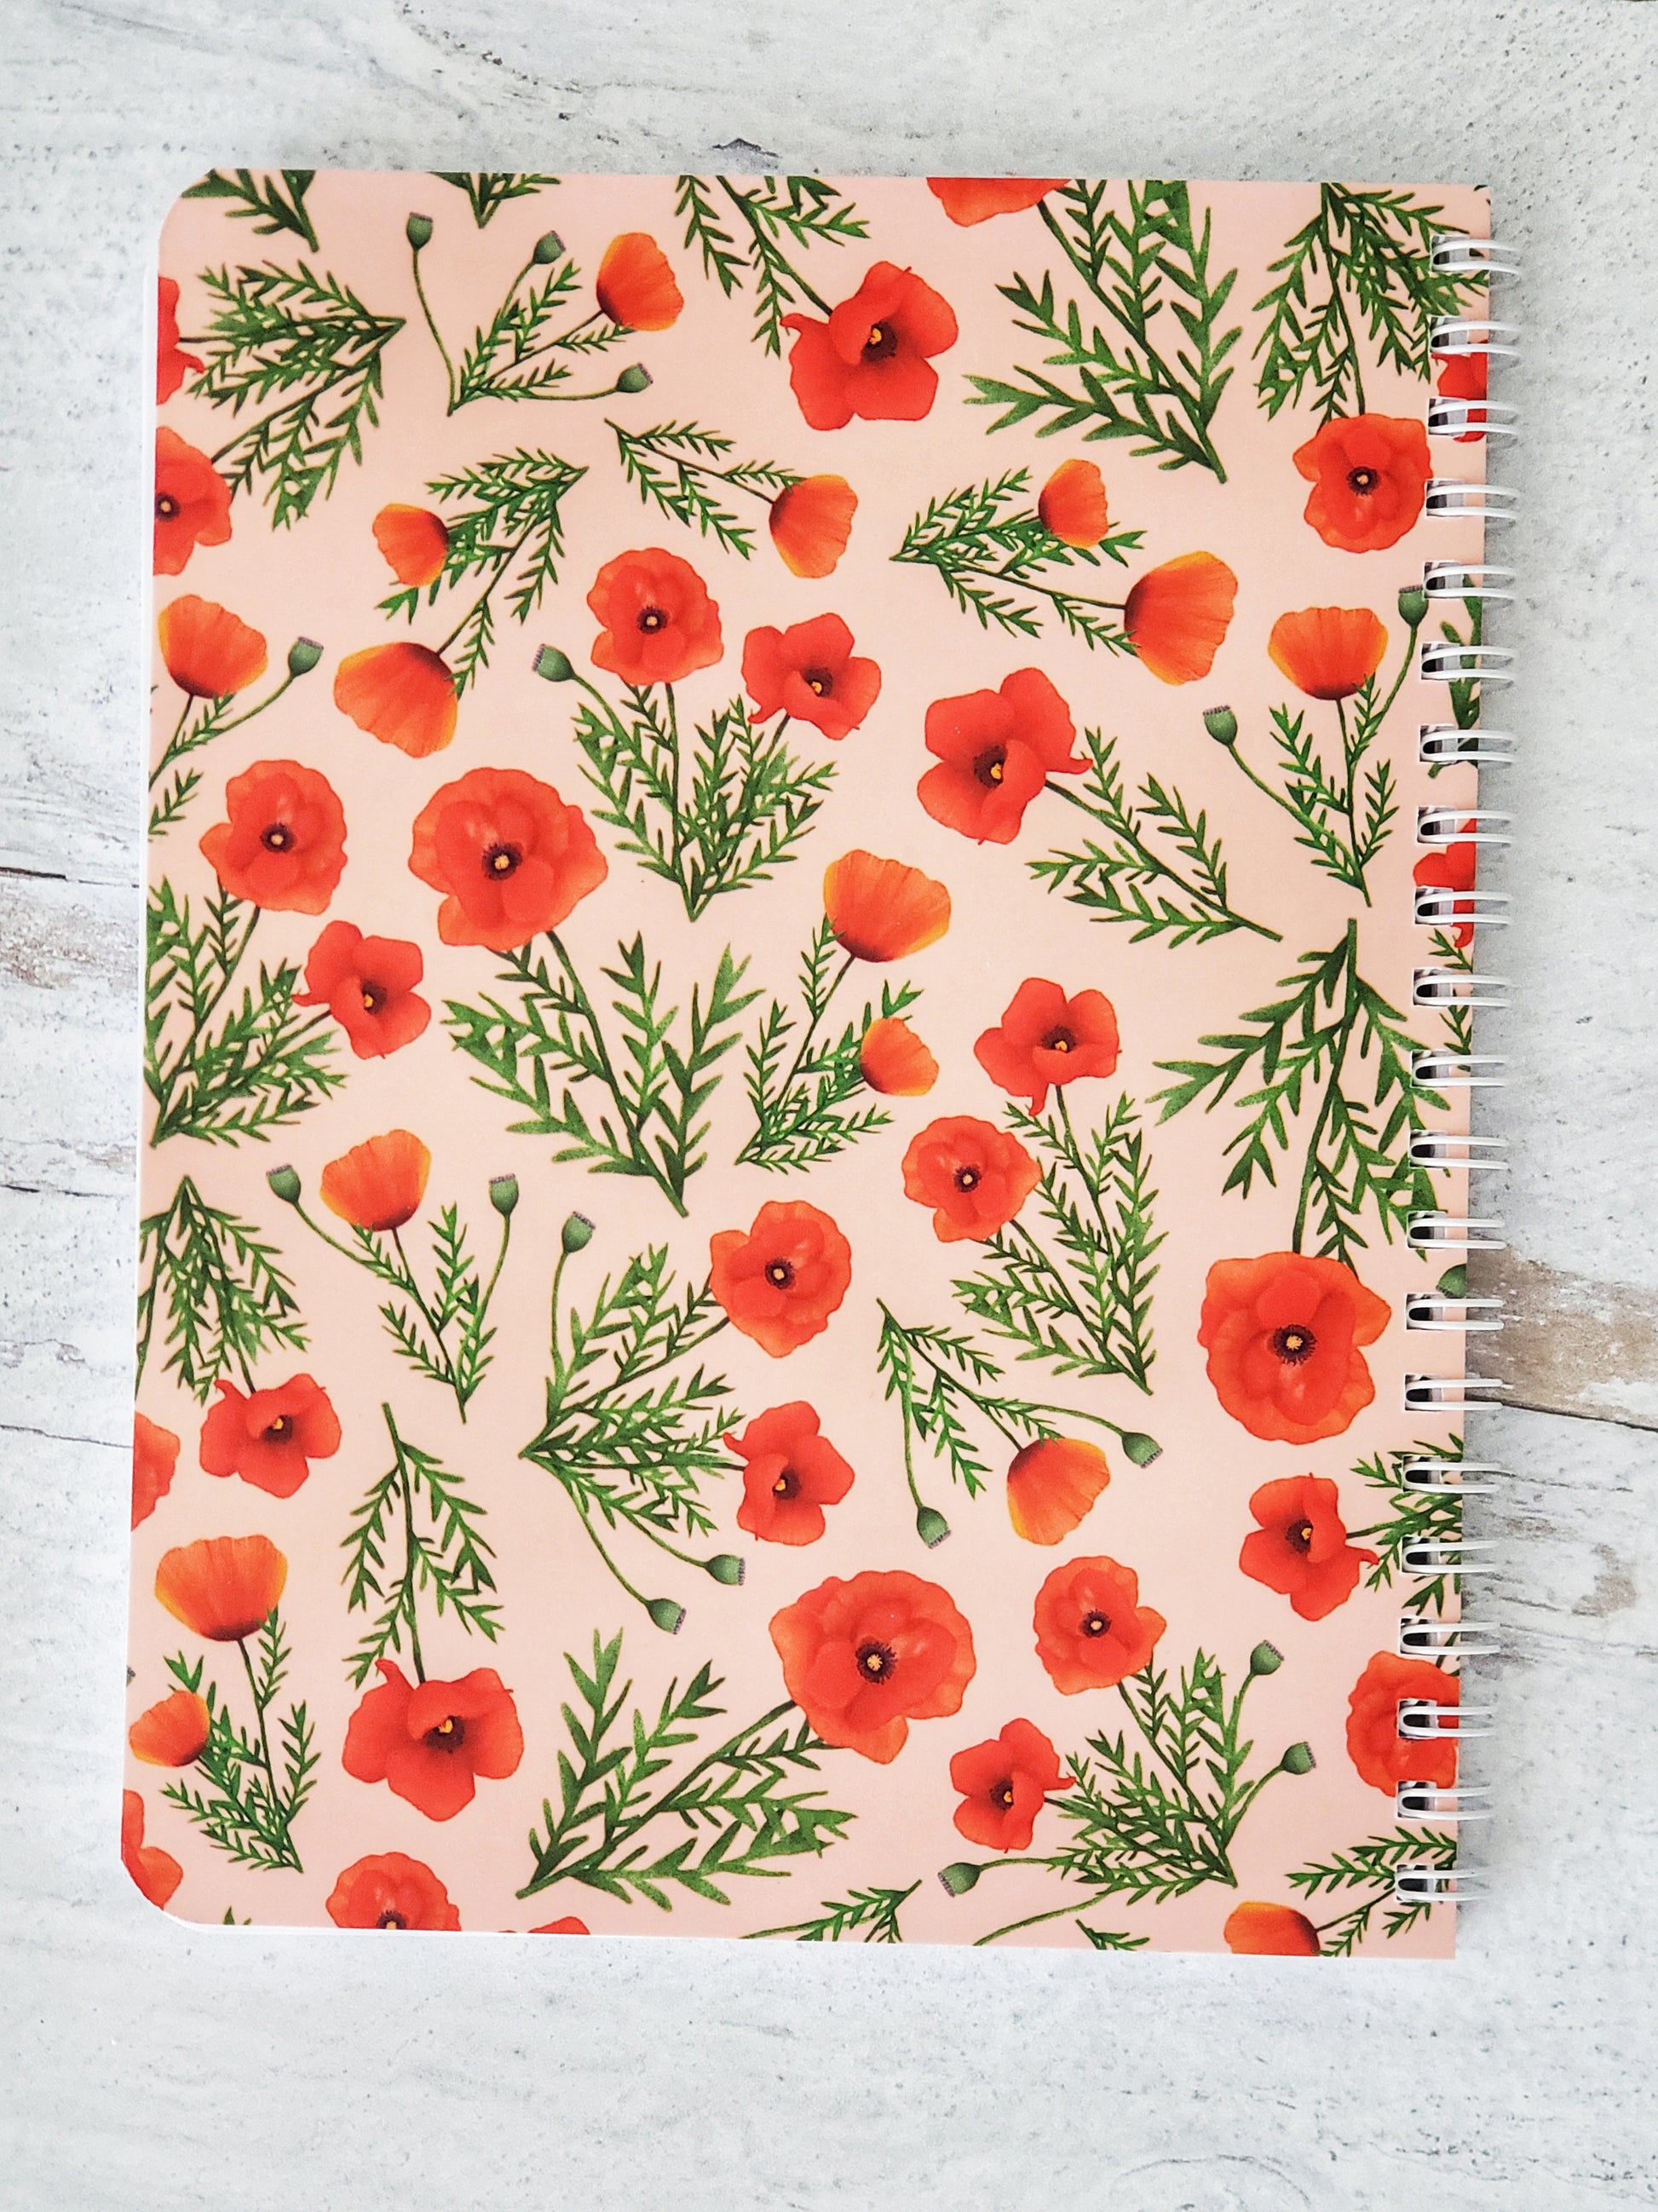 back cover of notebook with illustrated poppy pattern on light pink background